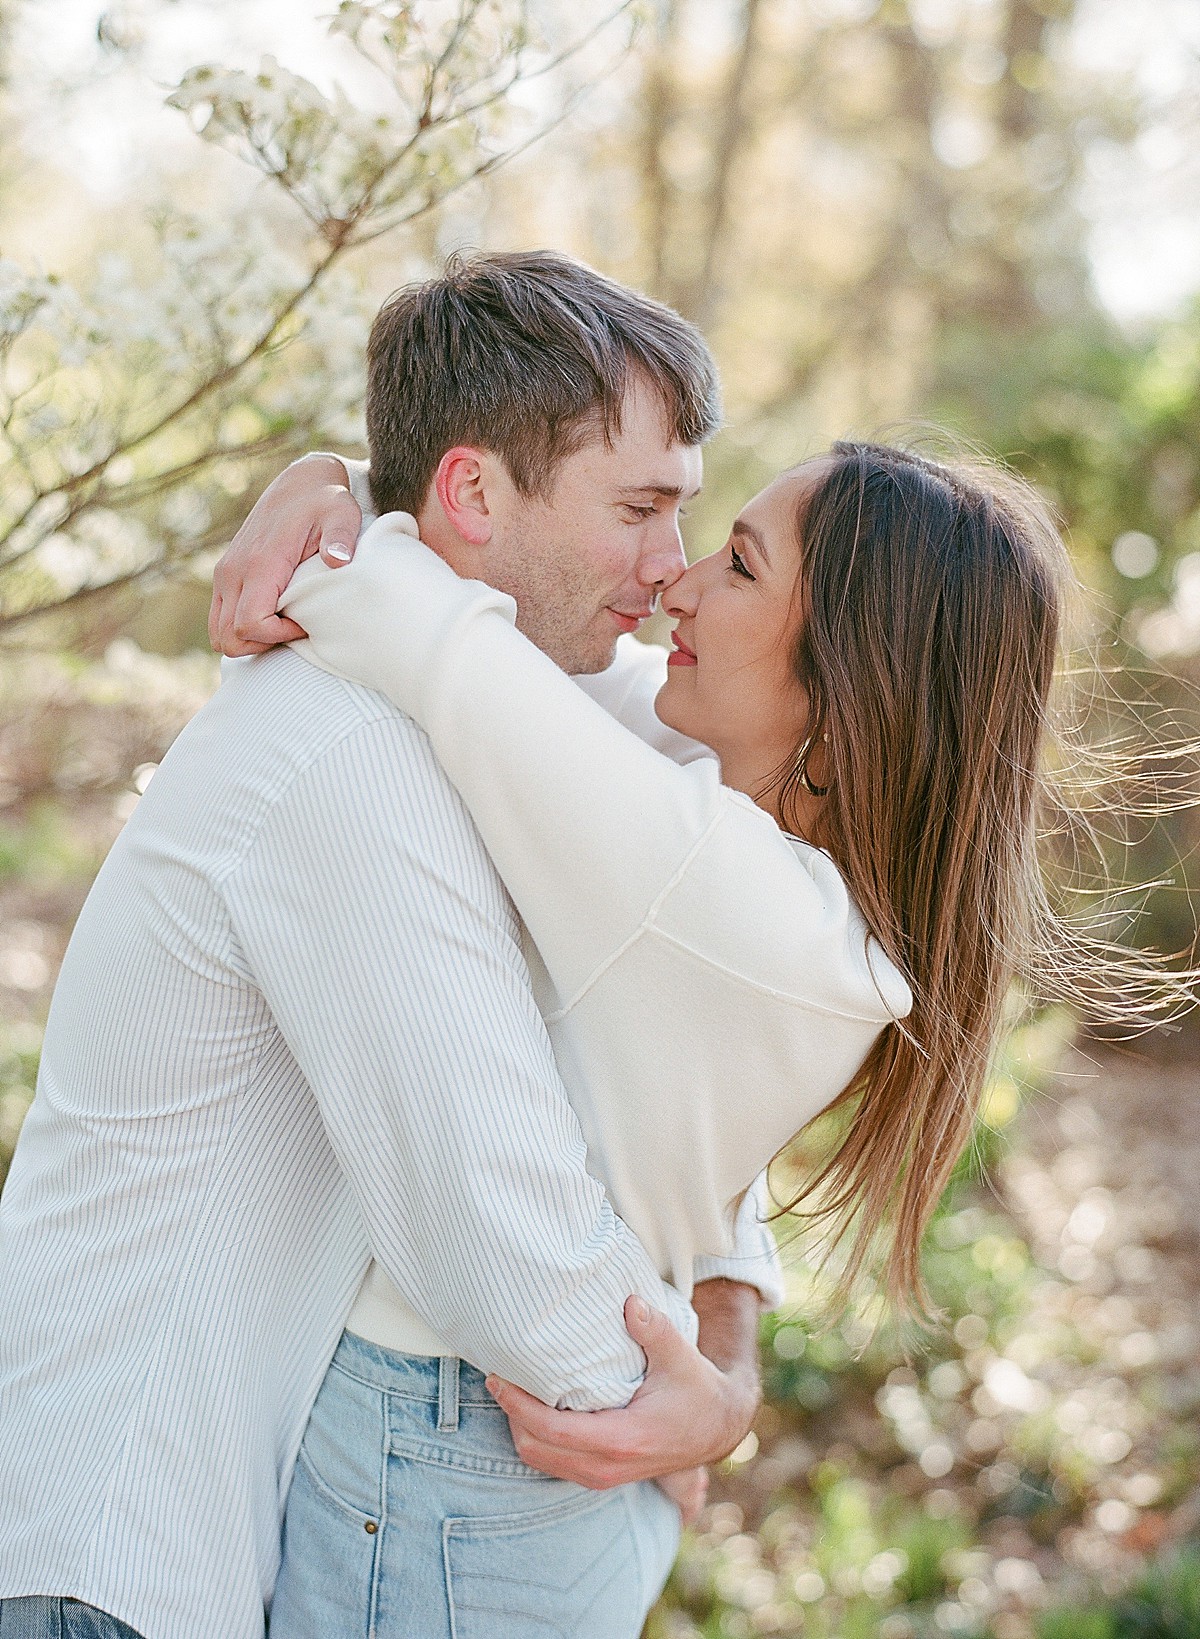 Young couple smiling nose to nose and embracing in a hug amid dogwood blooms at Piedmont Park